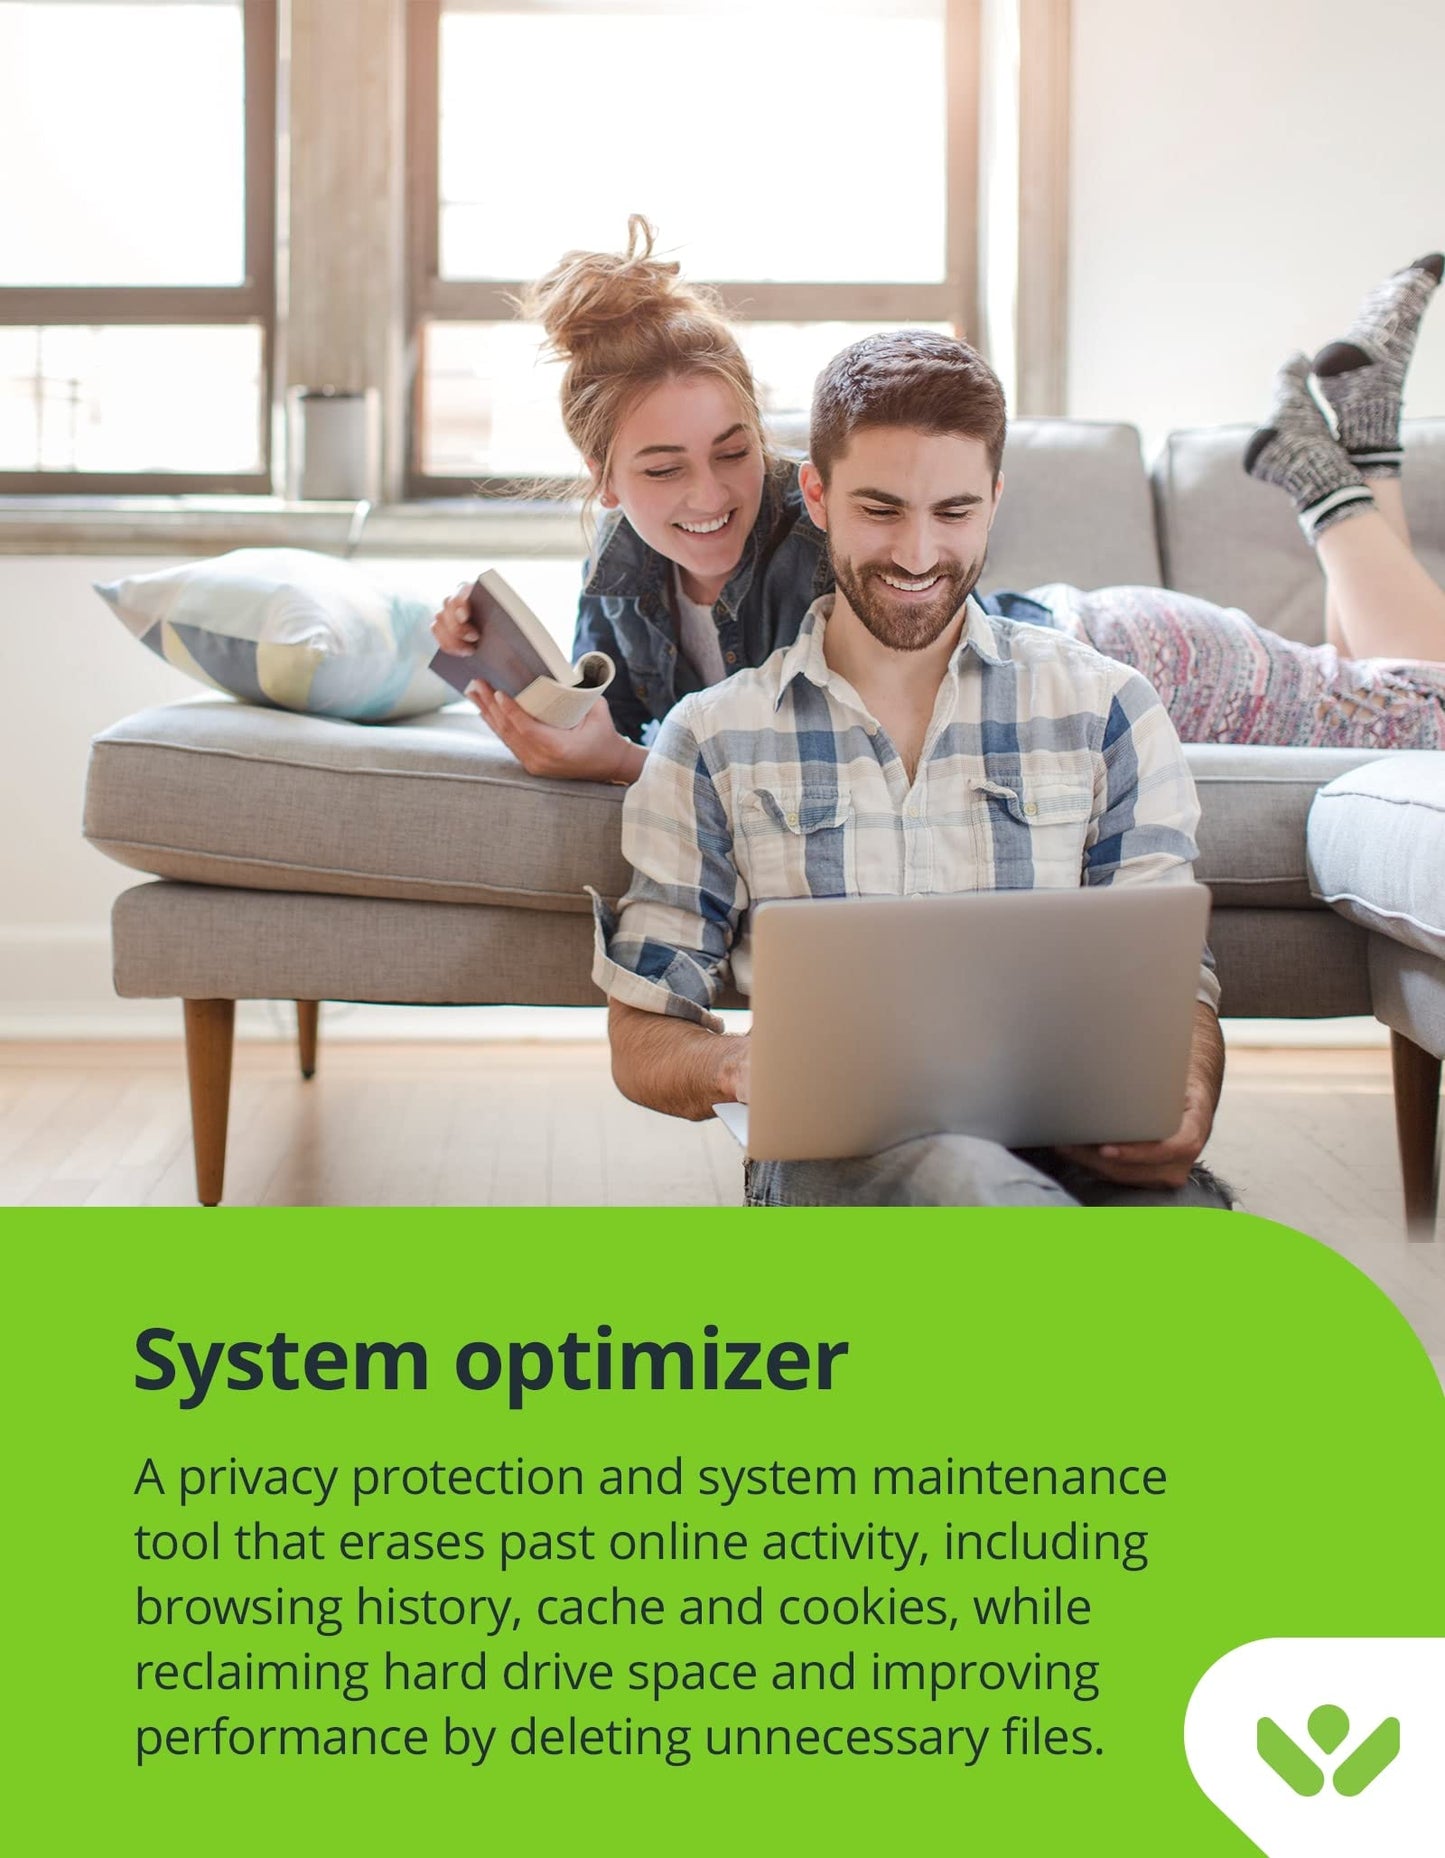 Webroot Internet Security Complete | Antivirus Software 2024 | 5 Device | 2 Year Download for PC/Mac/Chromebook/Android/IOS + Password Manager, Performance Optimizer & Cloud Backup